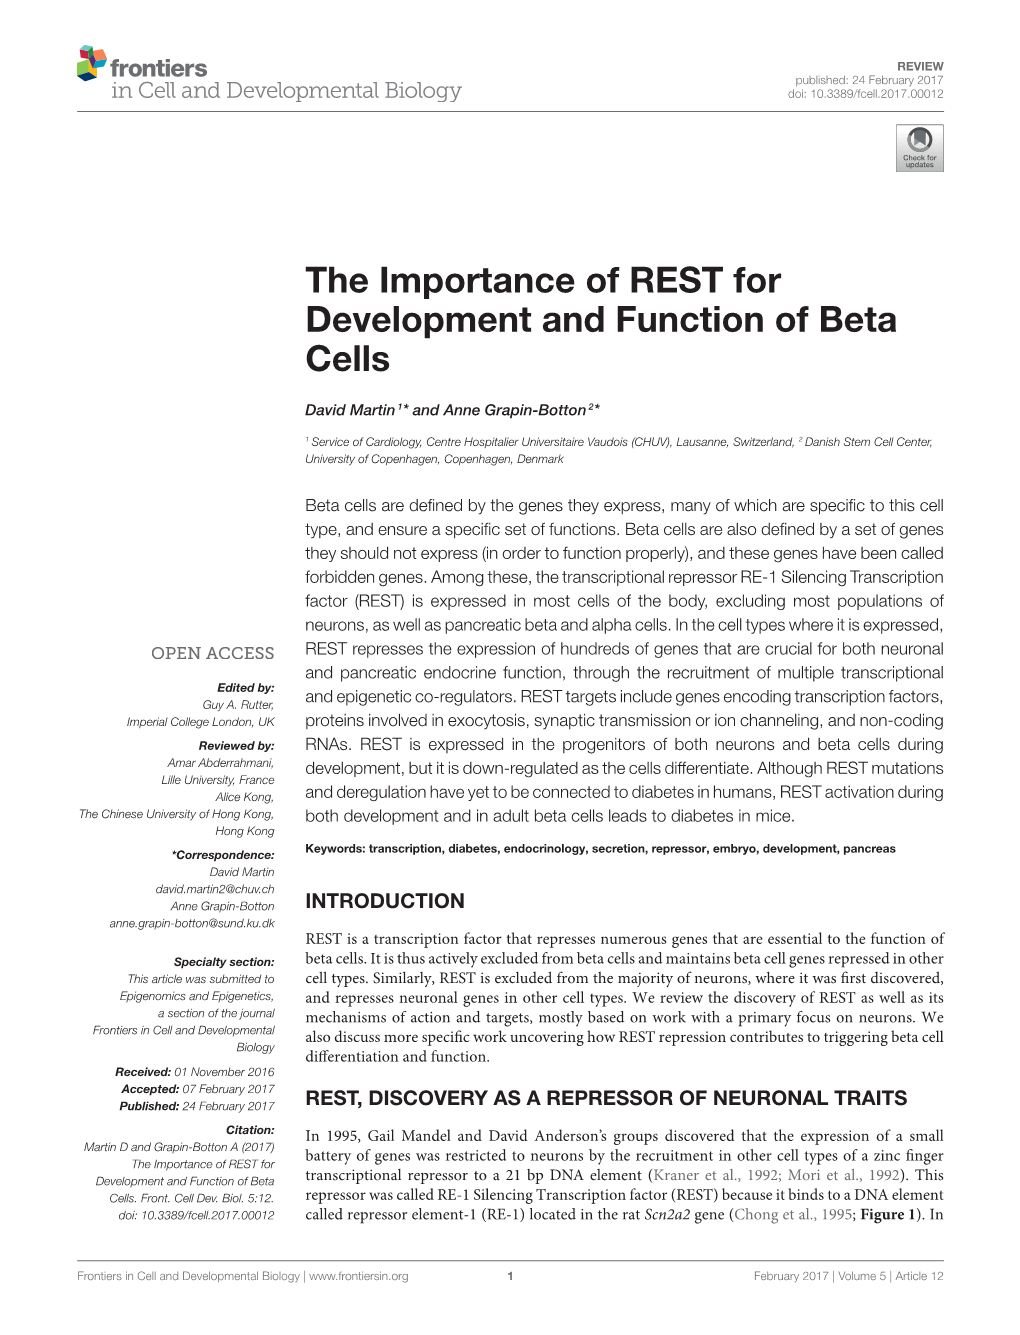 The Importance of REST for Development and Function of Beta Cells